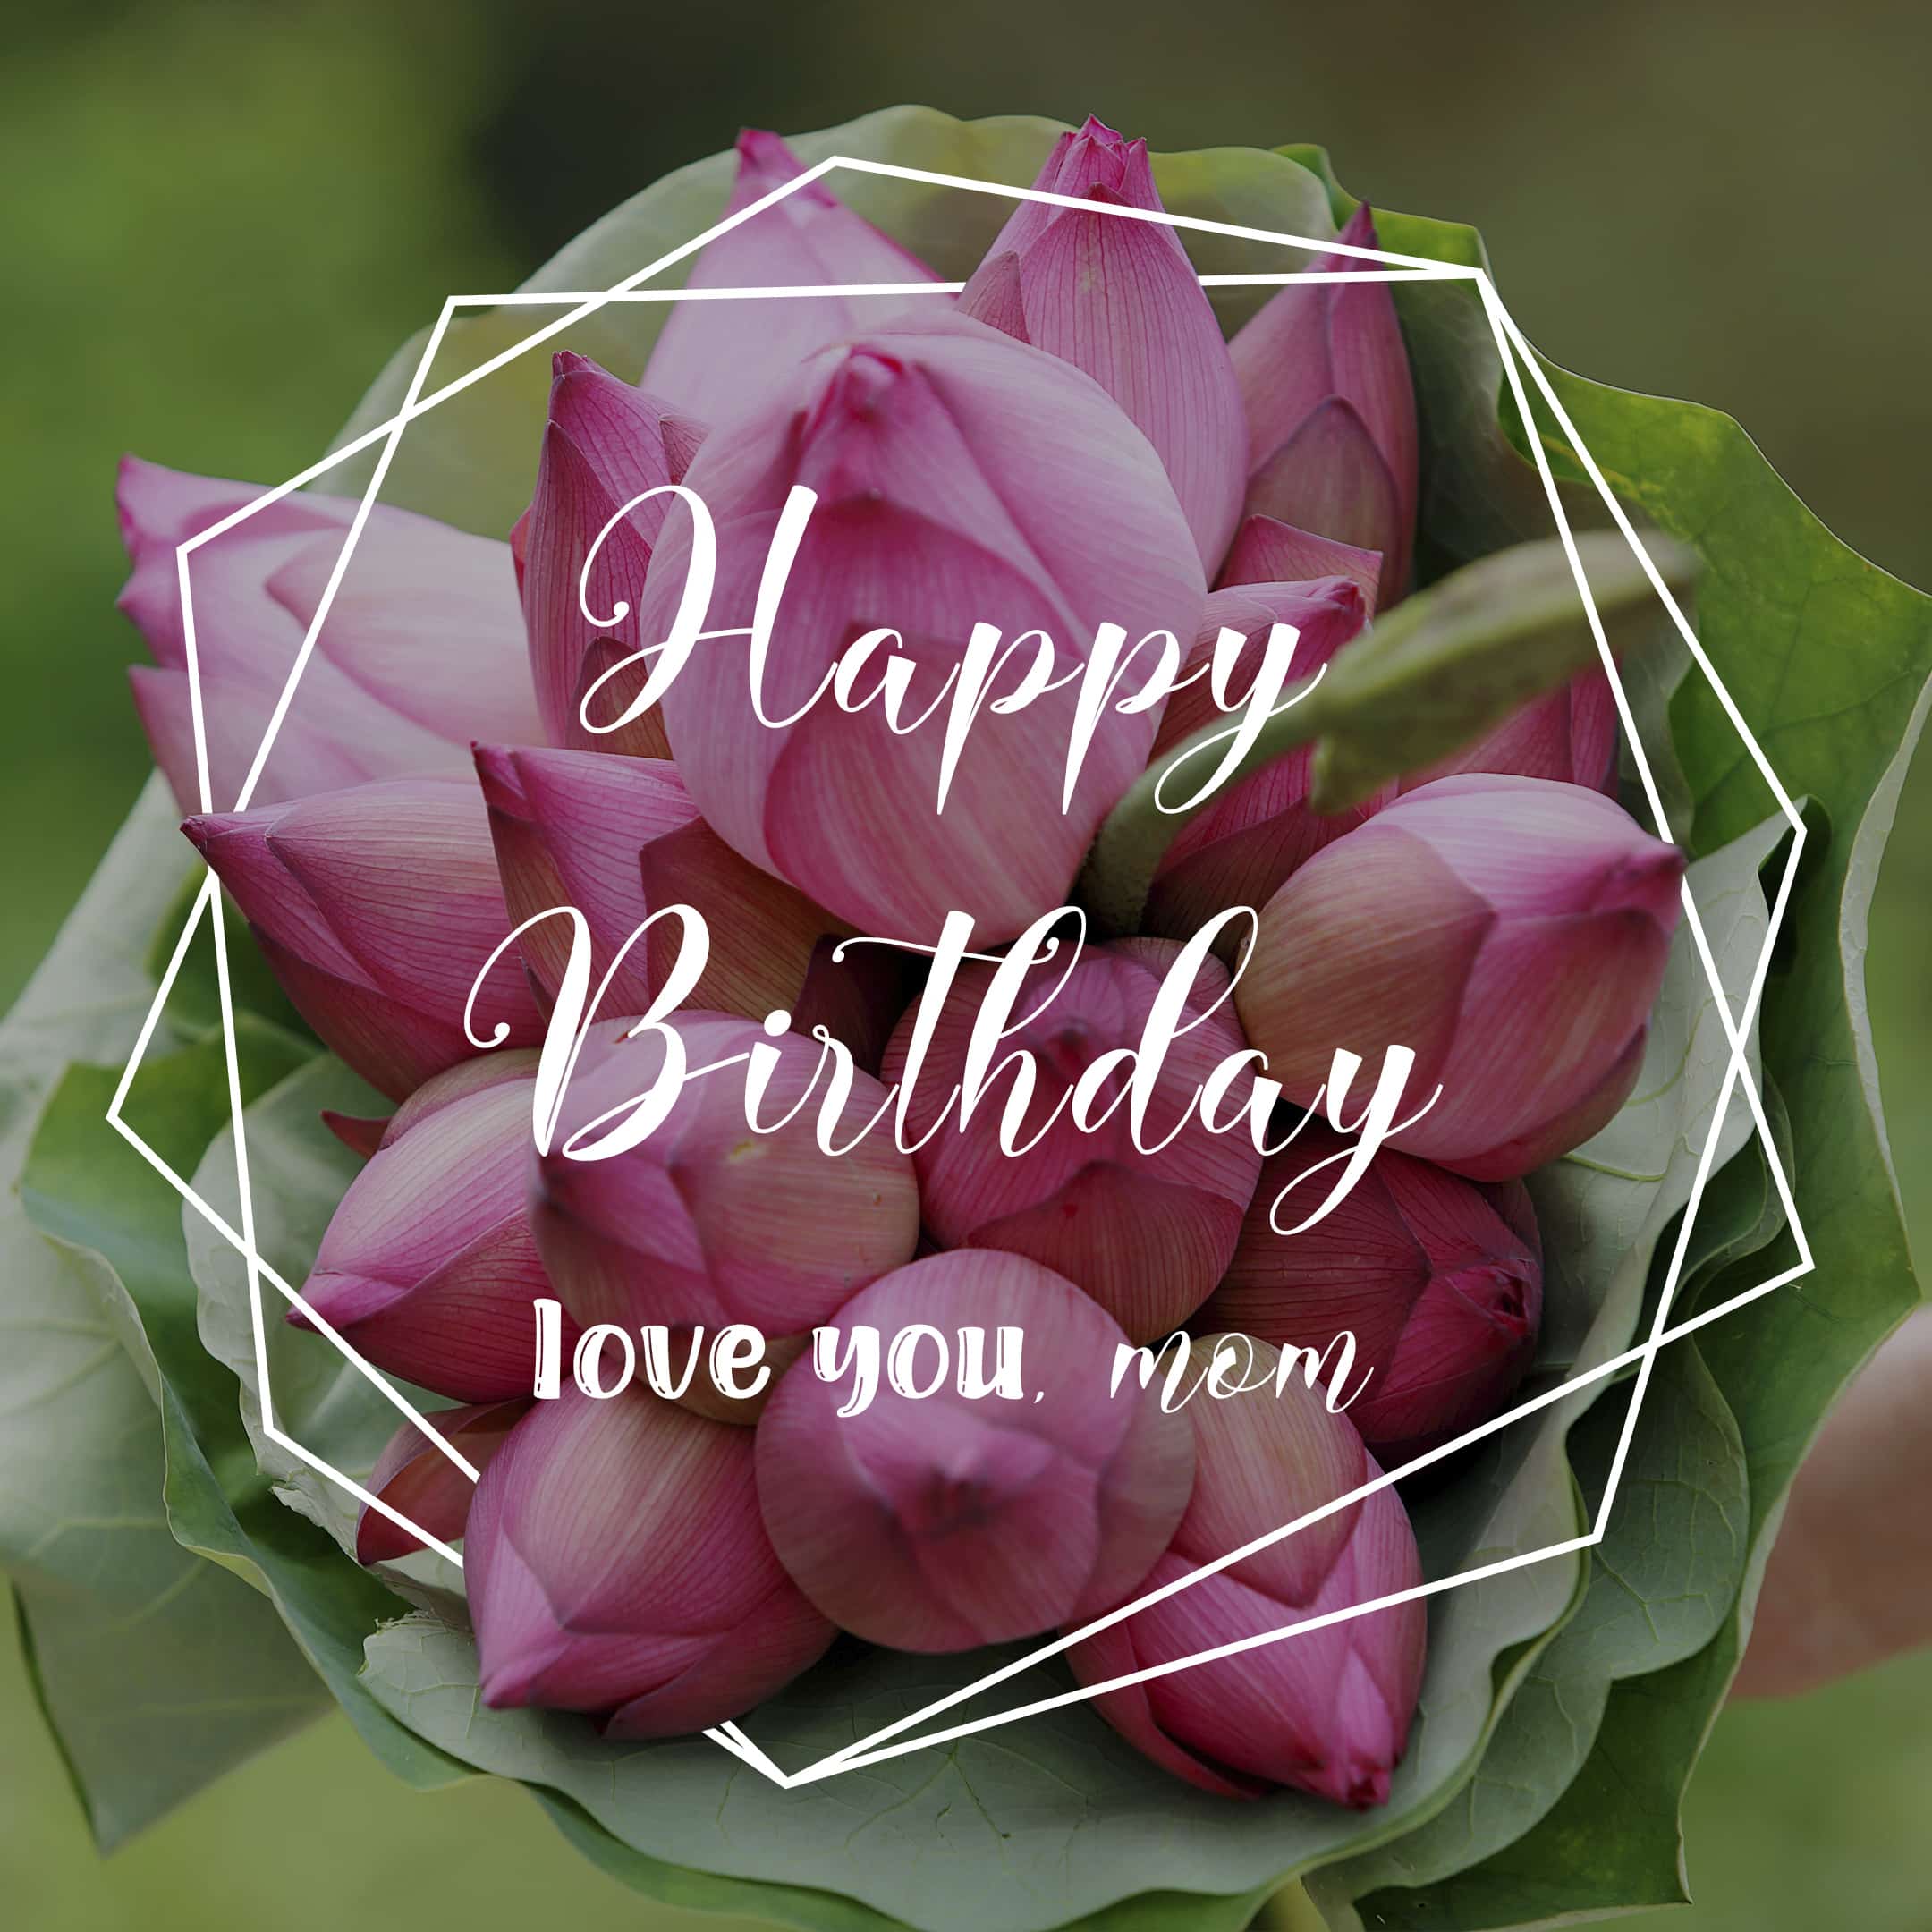 Free Happy Birthday Image For Mom With Flowers